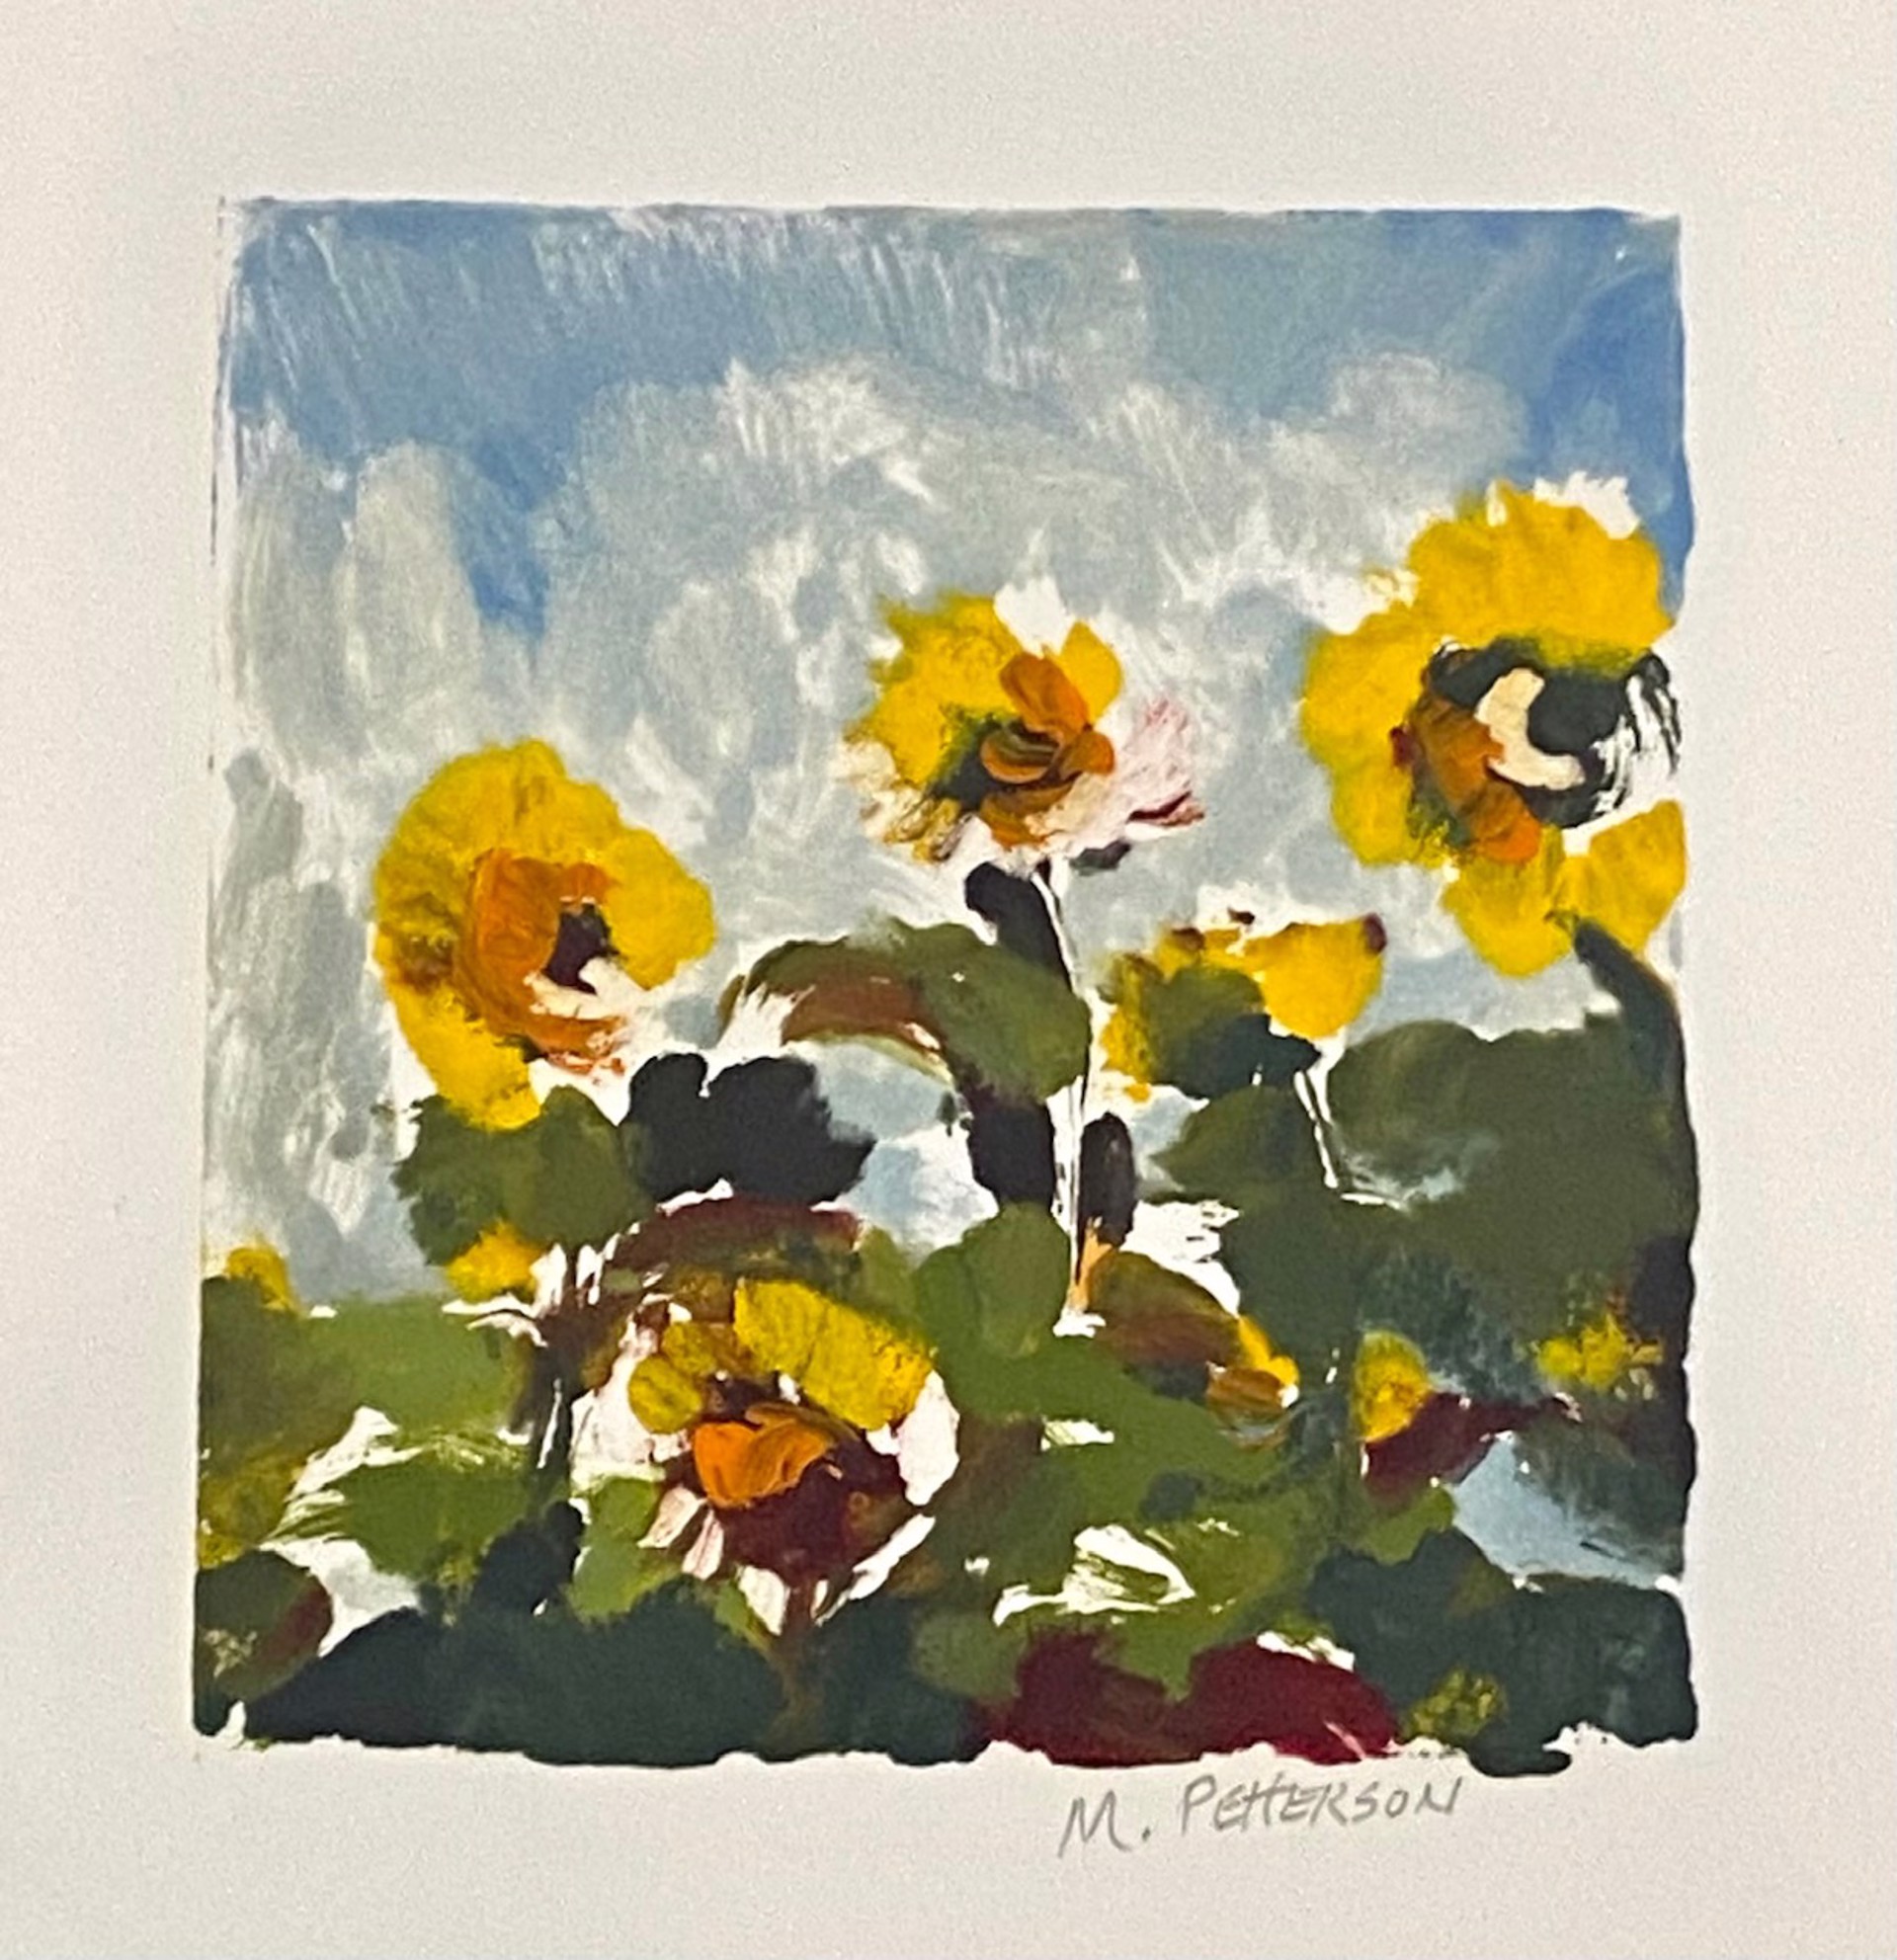 Sunflowers by Margaret Petterson